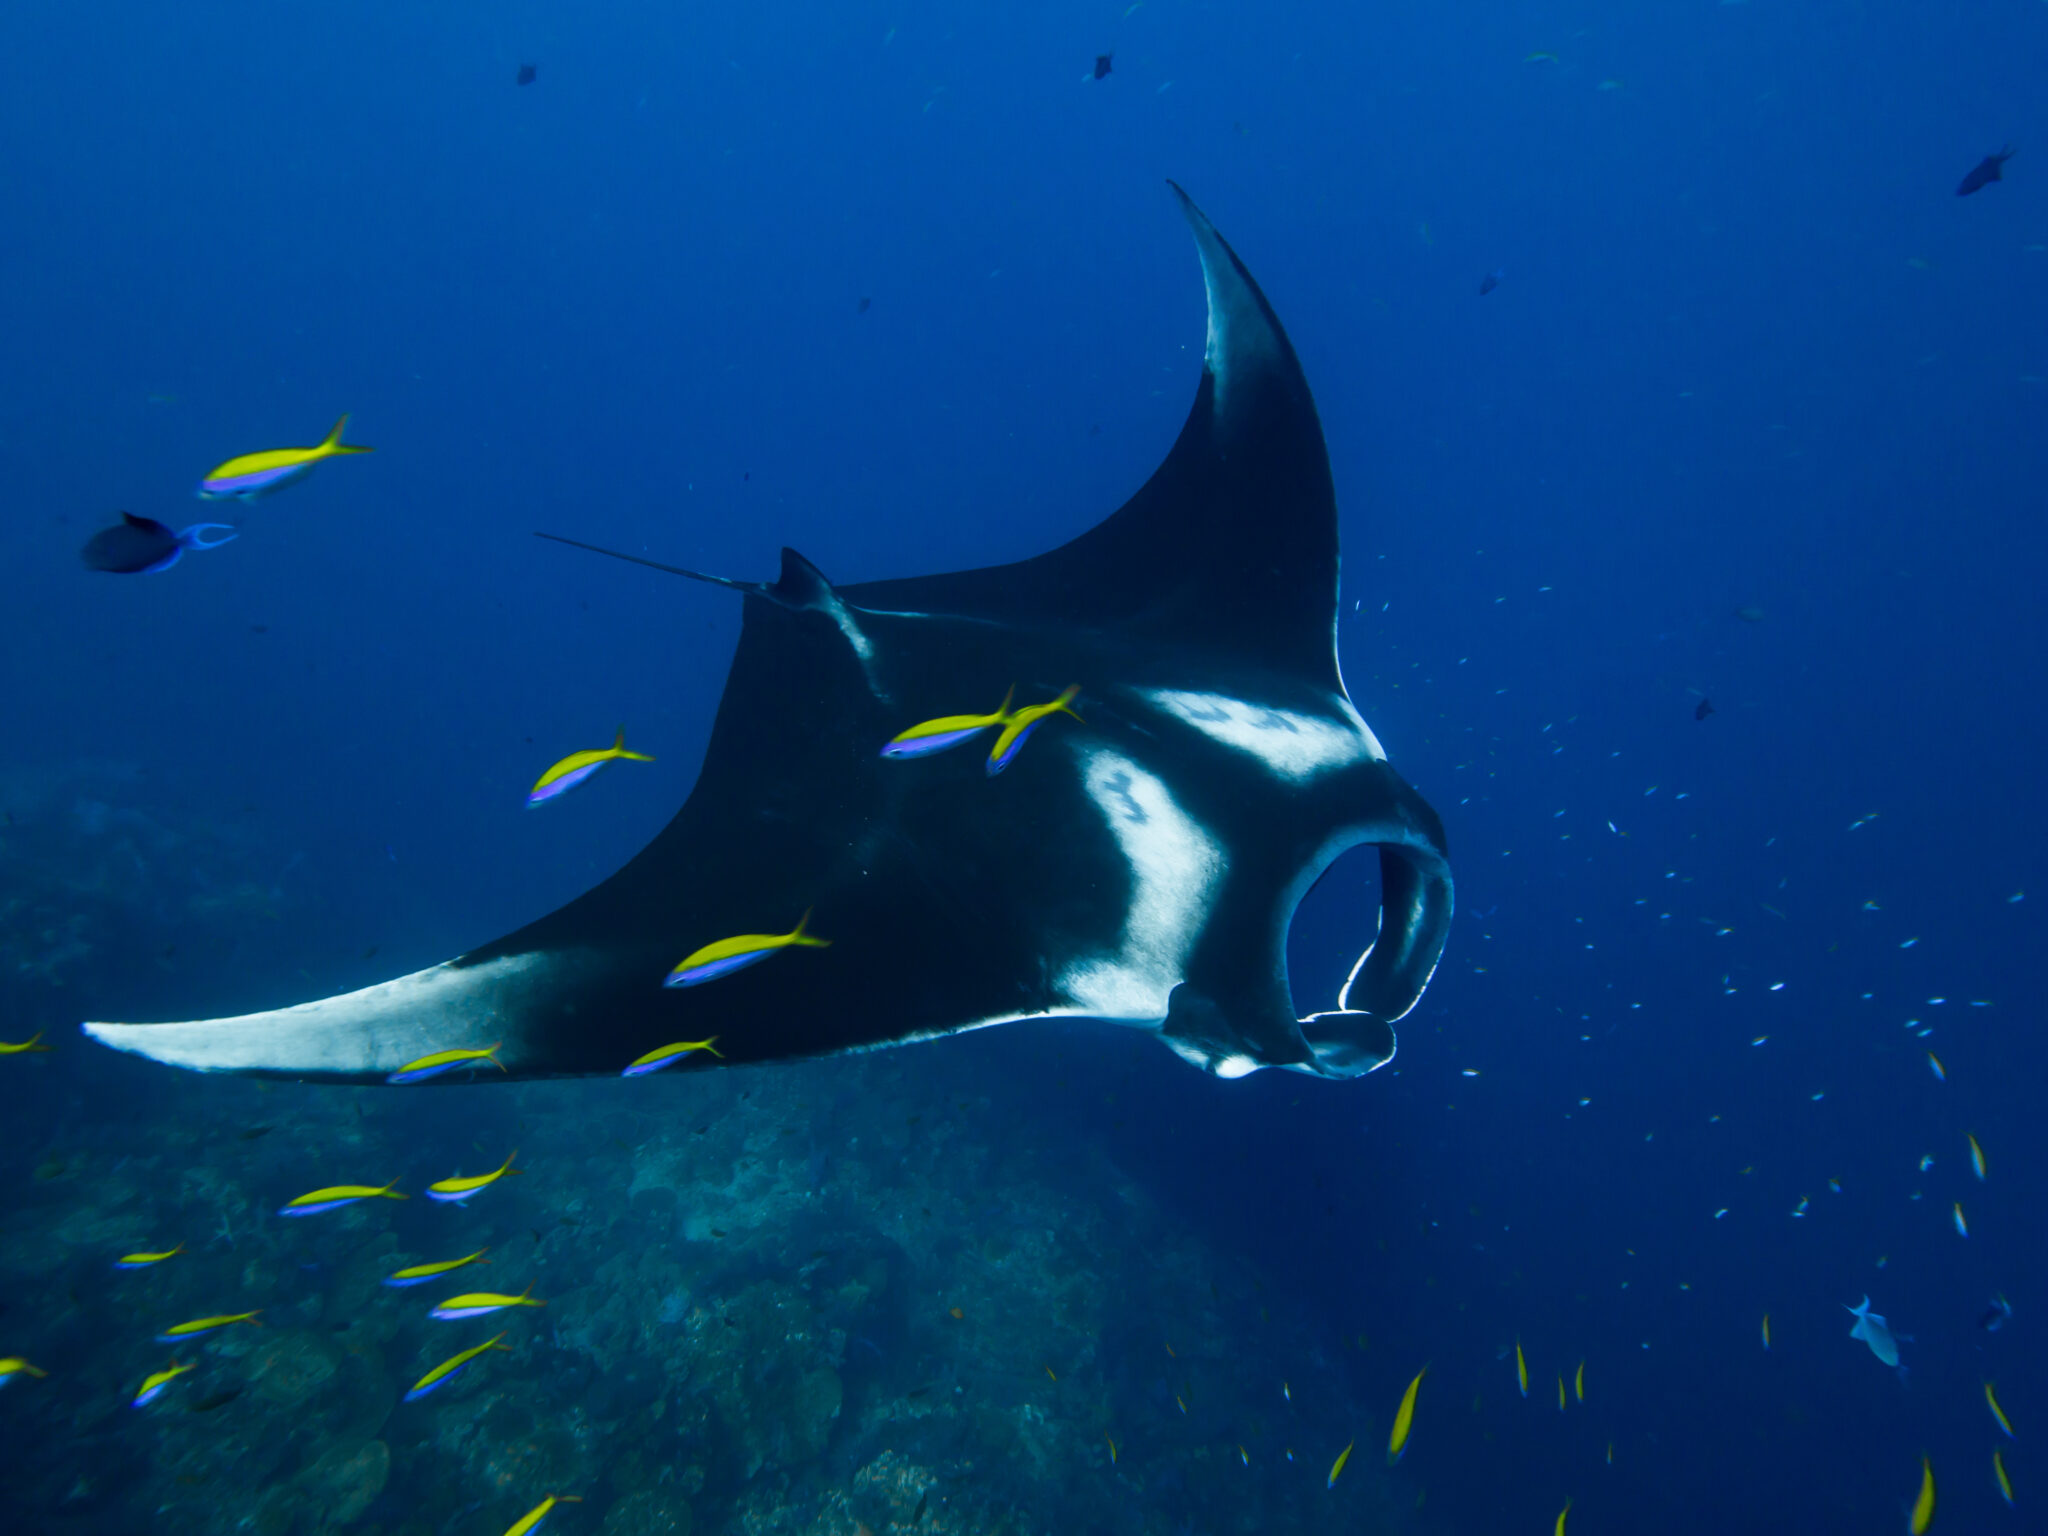 Manta rays are some of the most incredible marine animals in the world, and certainly need protection and respect.